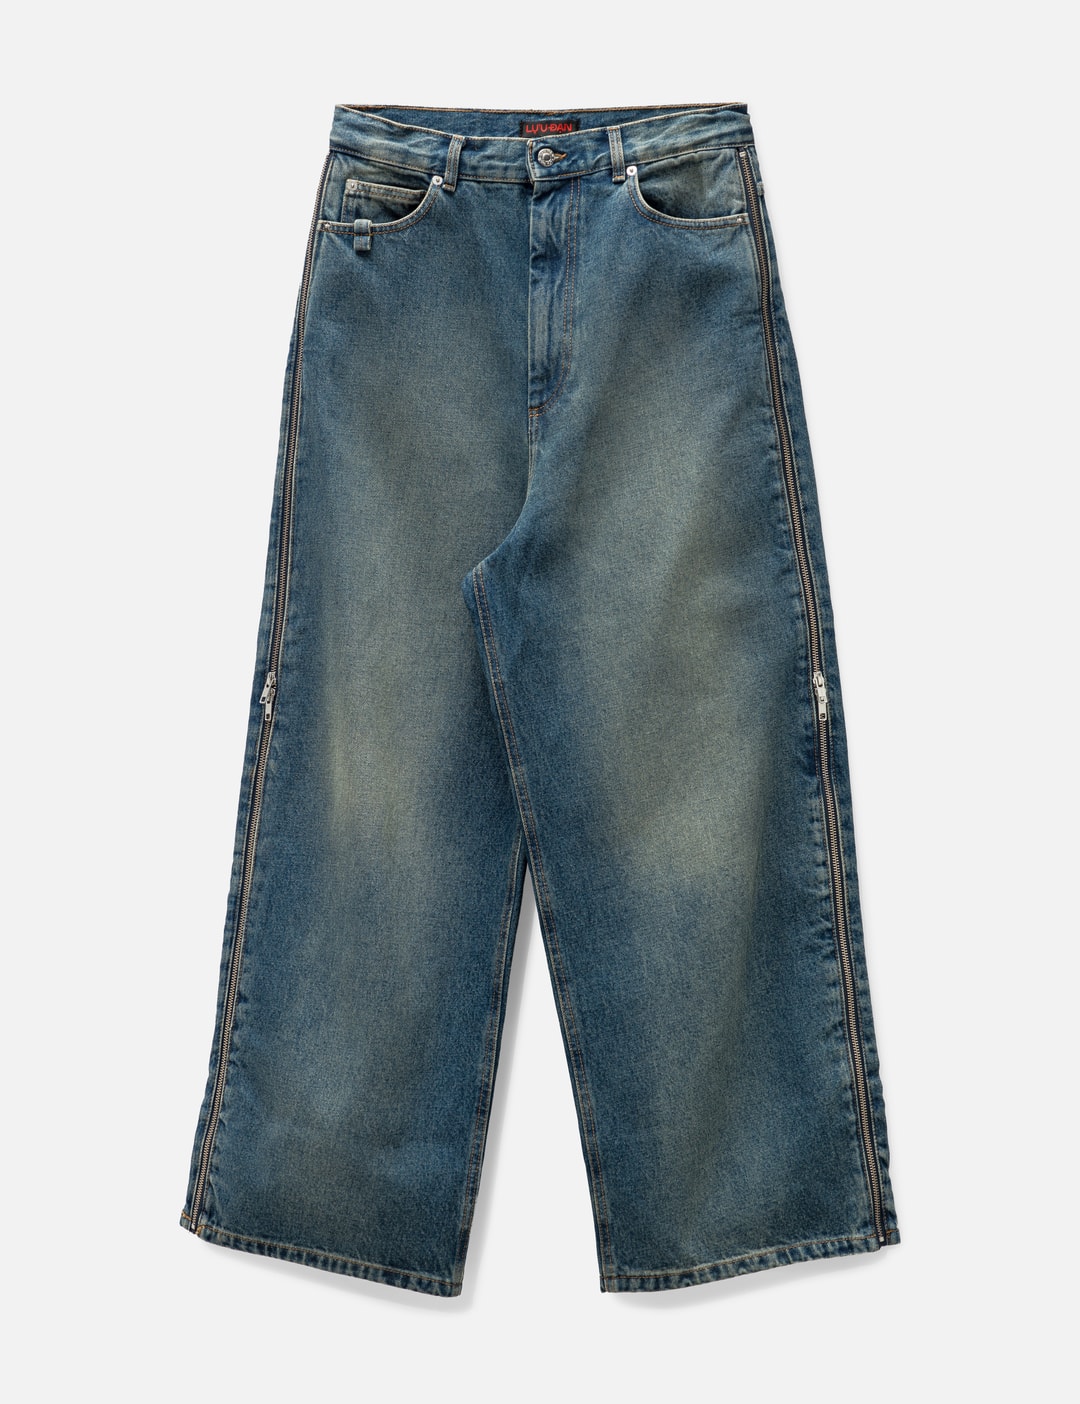 LUU DAN - Side Zip Jeans | HBX - Globally Curated Fashion and Lifestyle ...